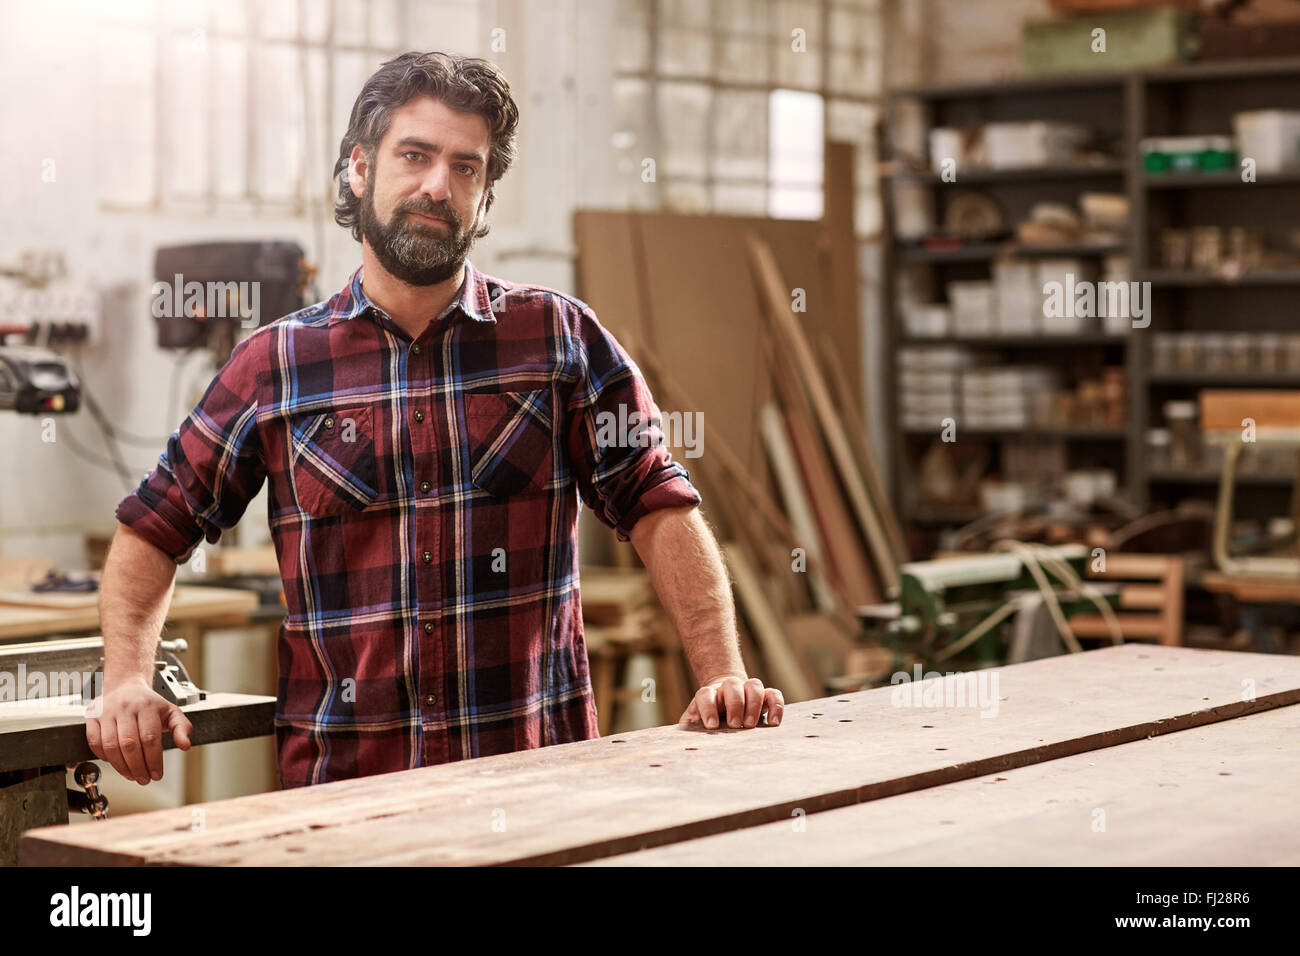 Artisan craftsman with a beard in his woodwork workshop Stock Photo